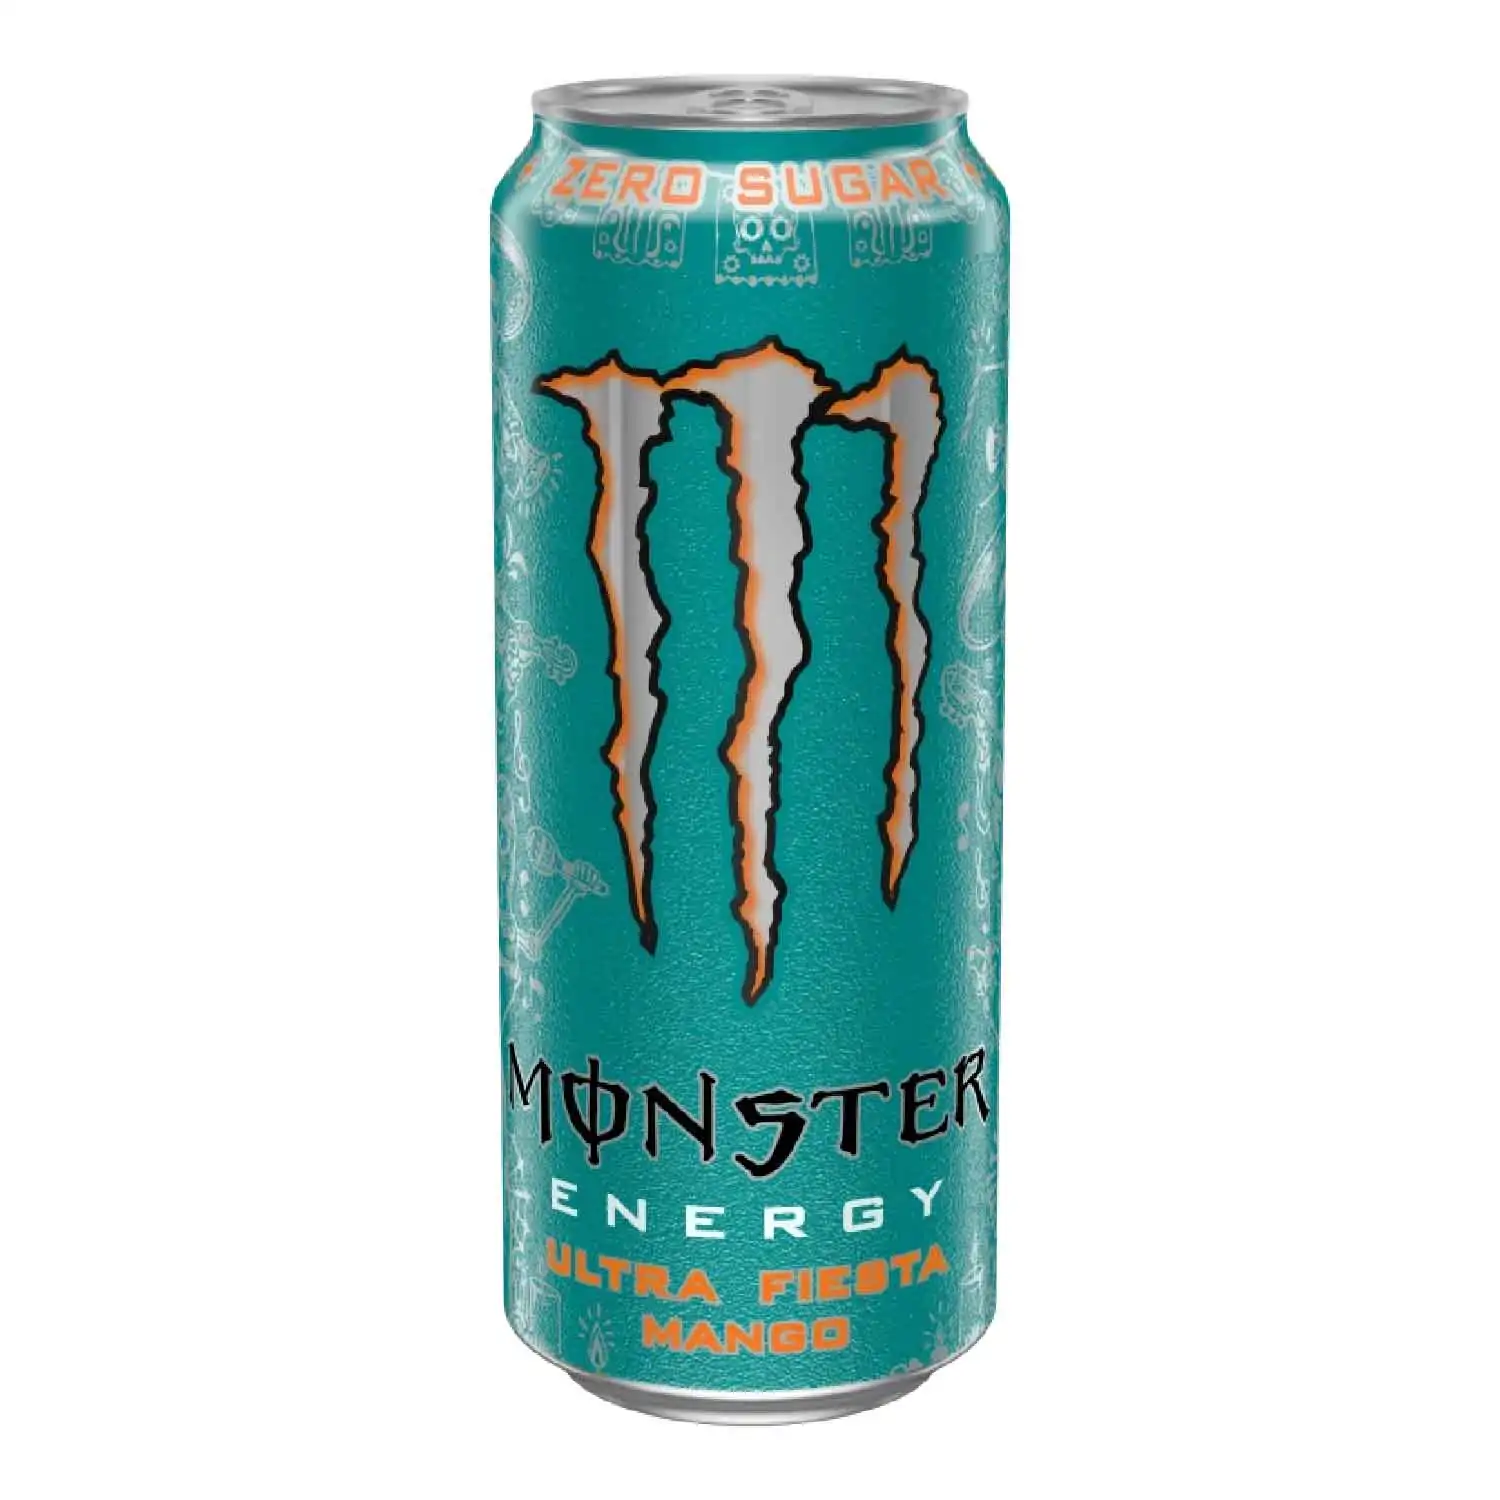 Monster ultra fiesta mango 50cl - Buy at Real Tobacco